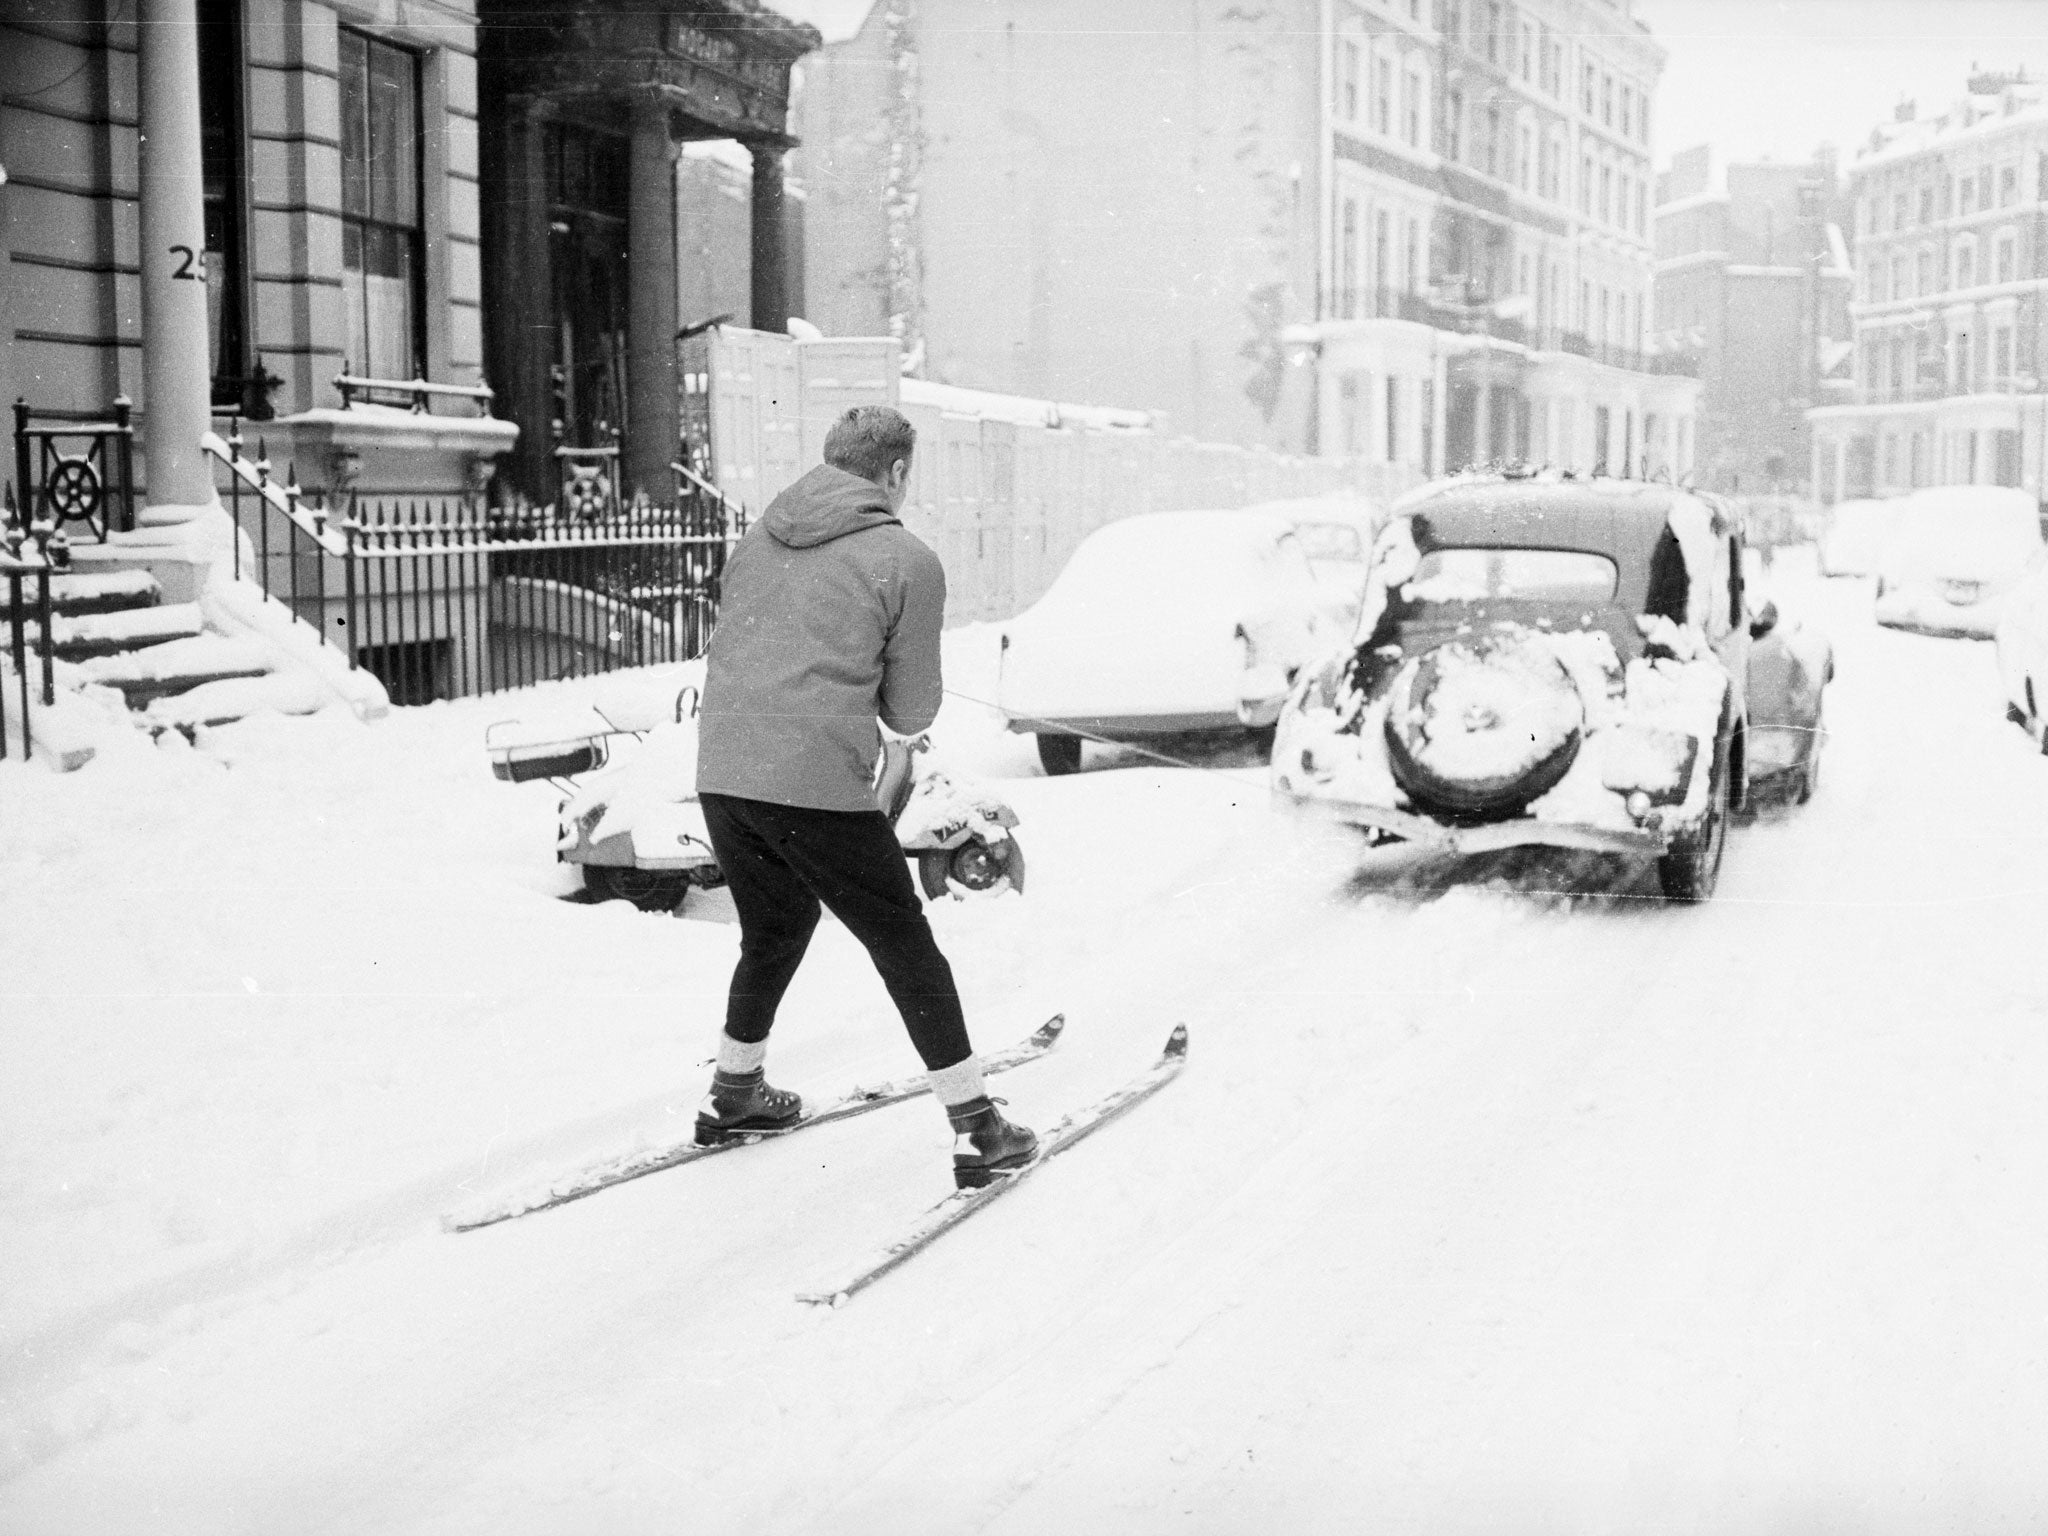 The 'Big Freeze of 1963' remains one of the coldest winters on record in the United Kingdom